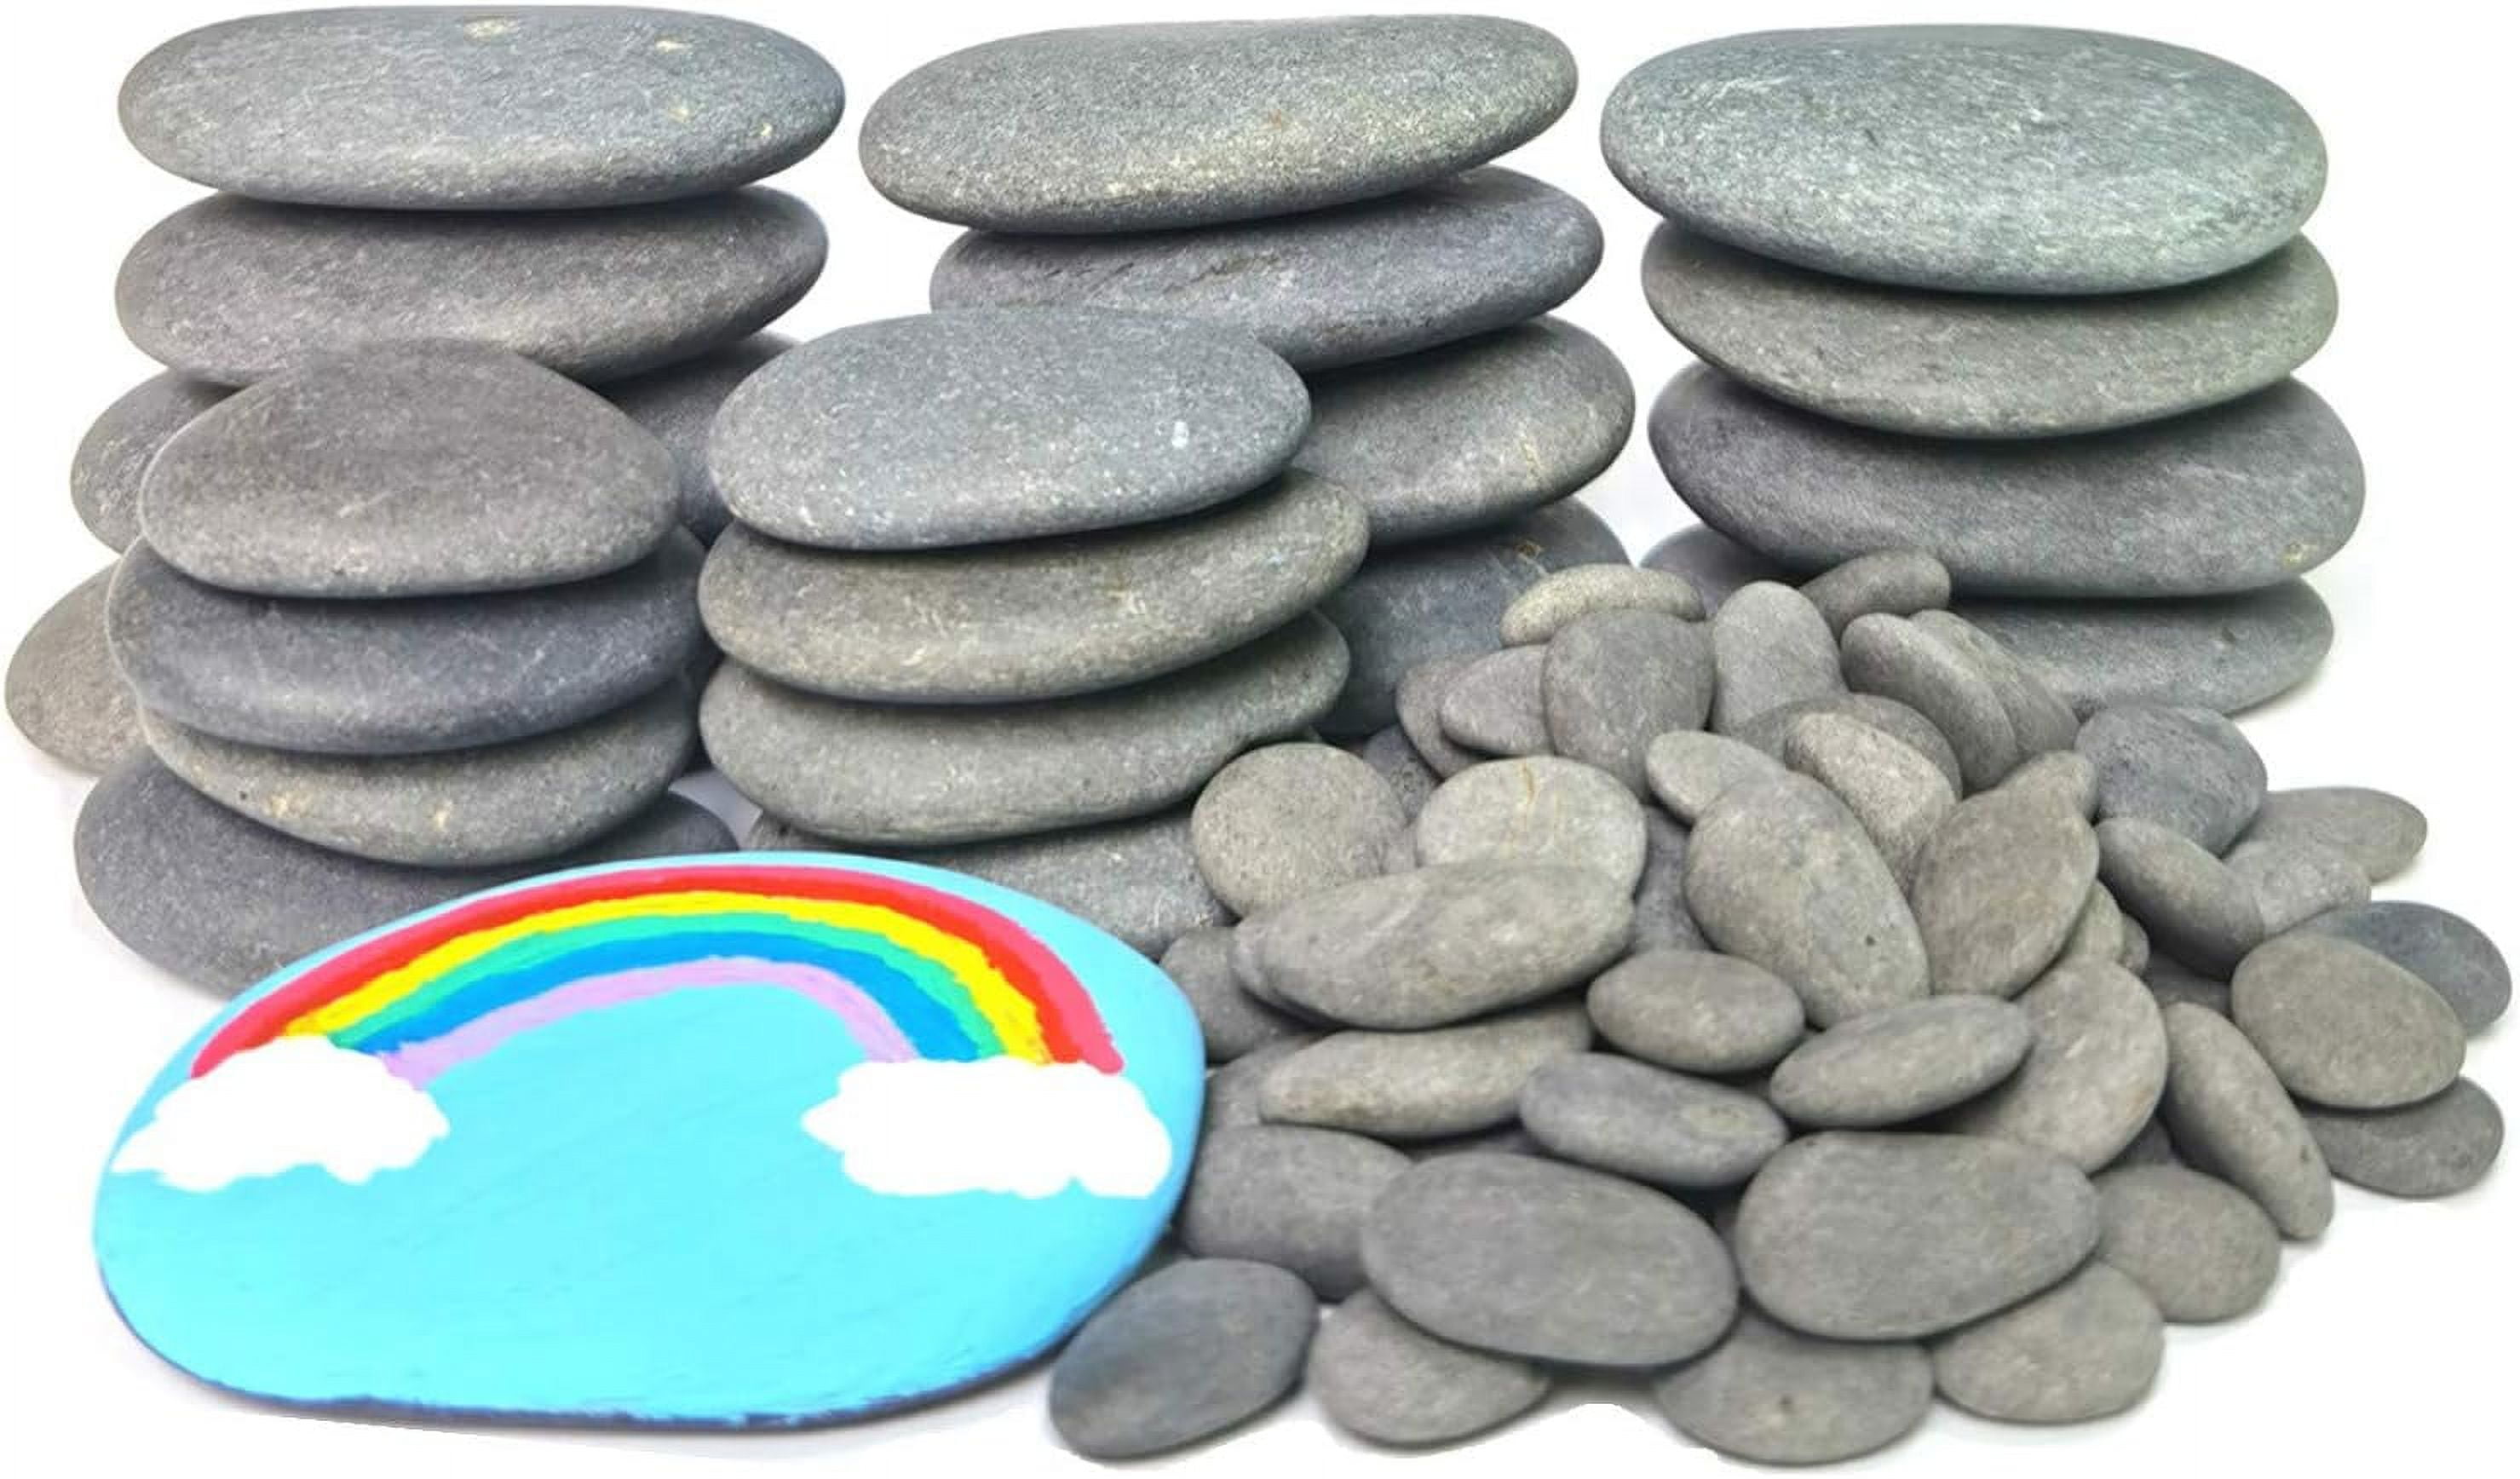 60 Pcs Large Rocks to Paint,River Rocks for Painting, 2-3 Inches DIY Flat  Stones to Paint, Kindness Rocks, Outdoor Garden Rock Art, Family DIY